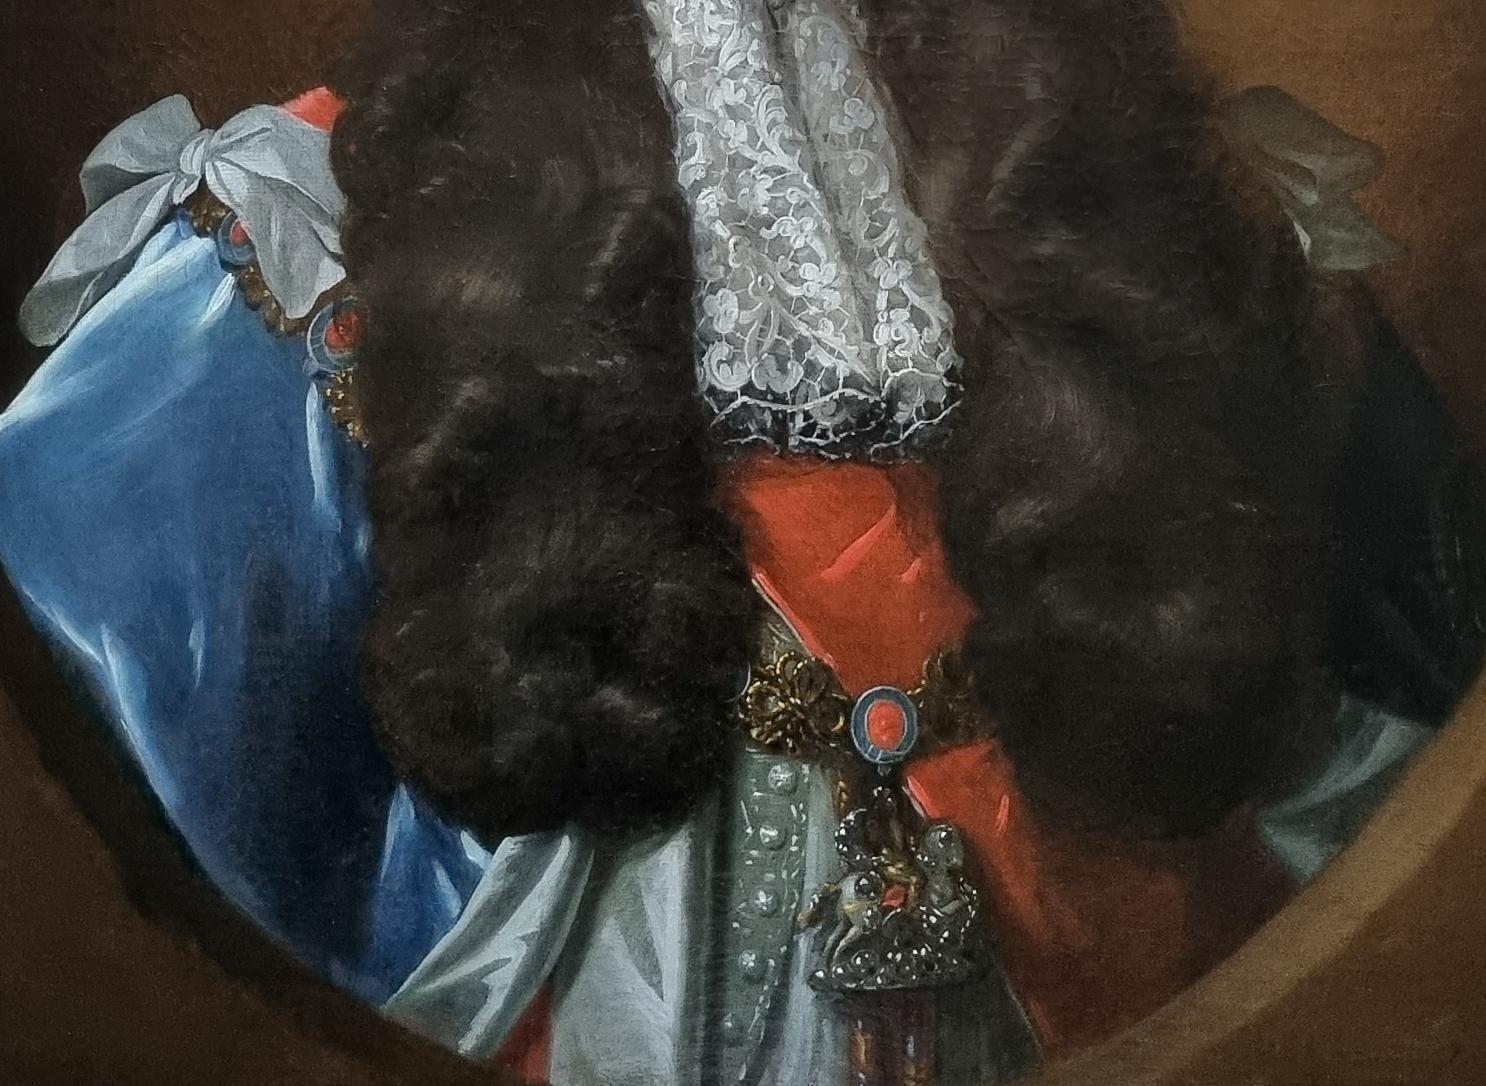 This exquisite portrait belonged to a collection of artwork and family heirlooms of the Howard family at Greystoke Castle.  Greystoke has over one thousand years of history and a long line of respectable Howards who have owned it since the mid 1500s